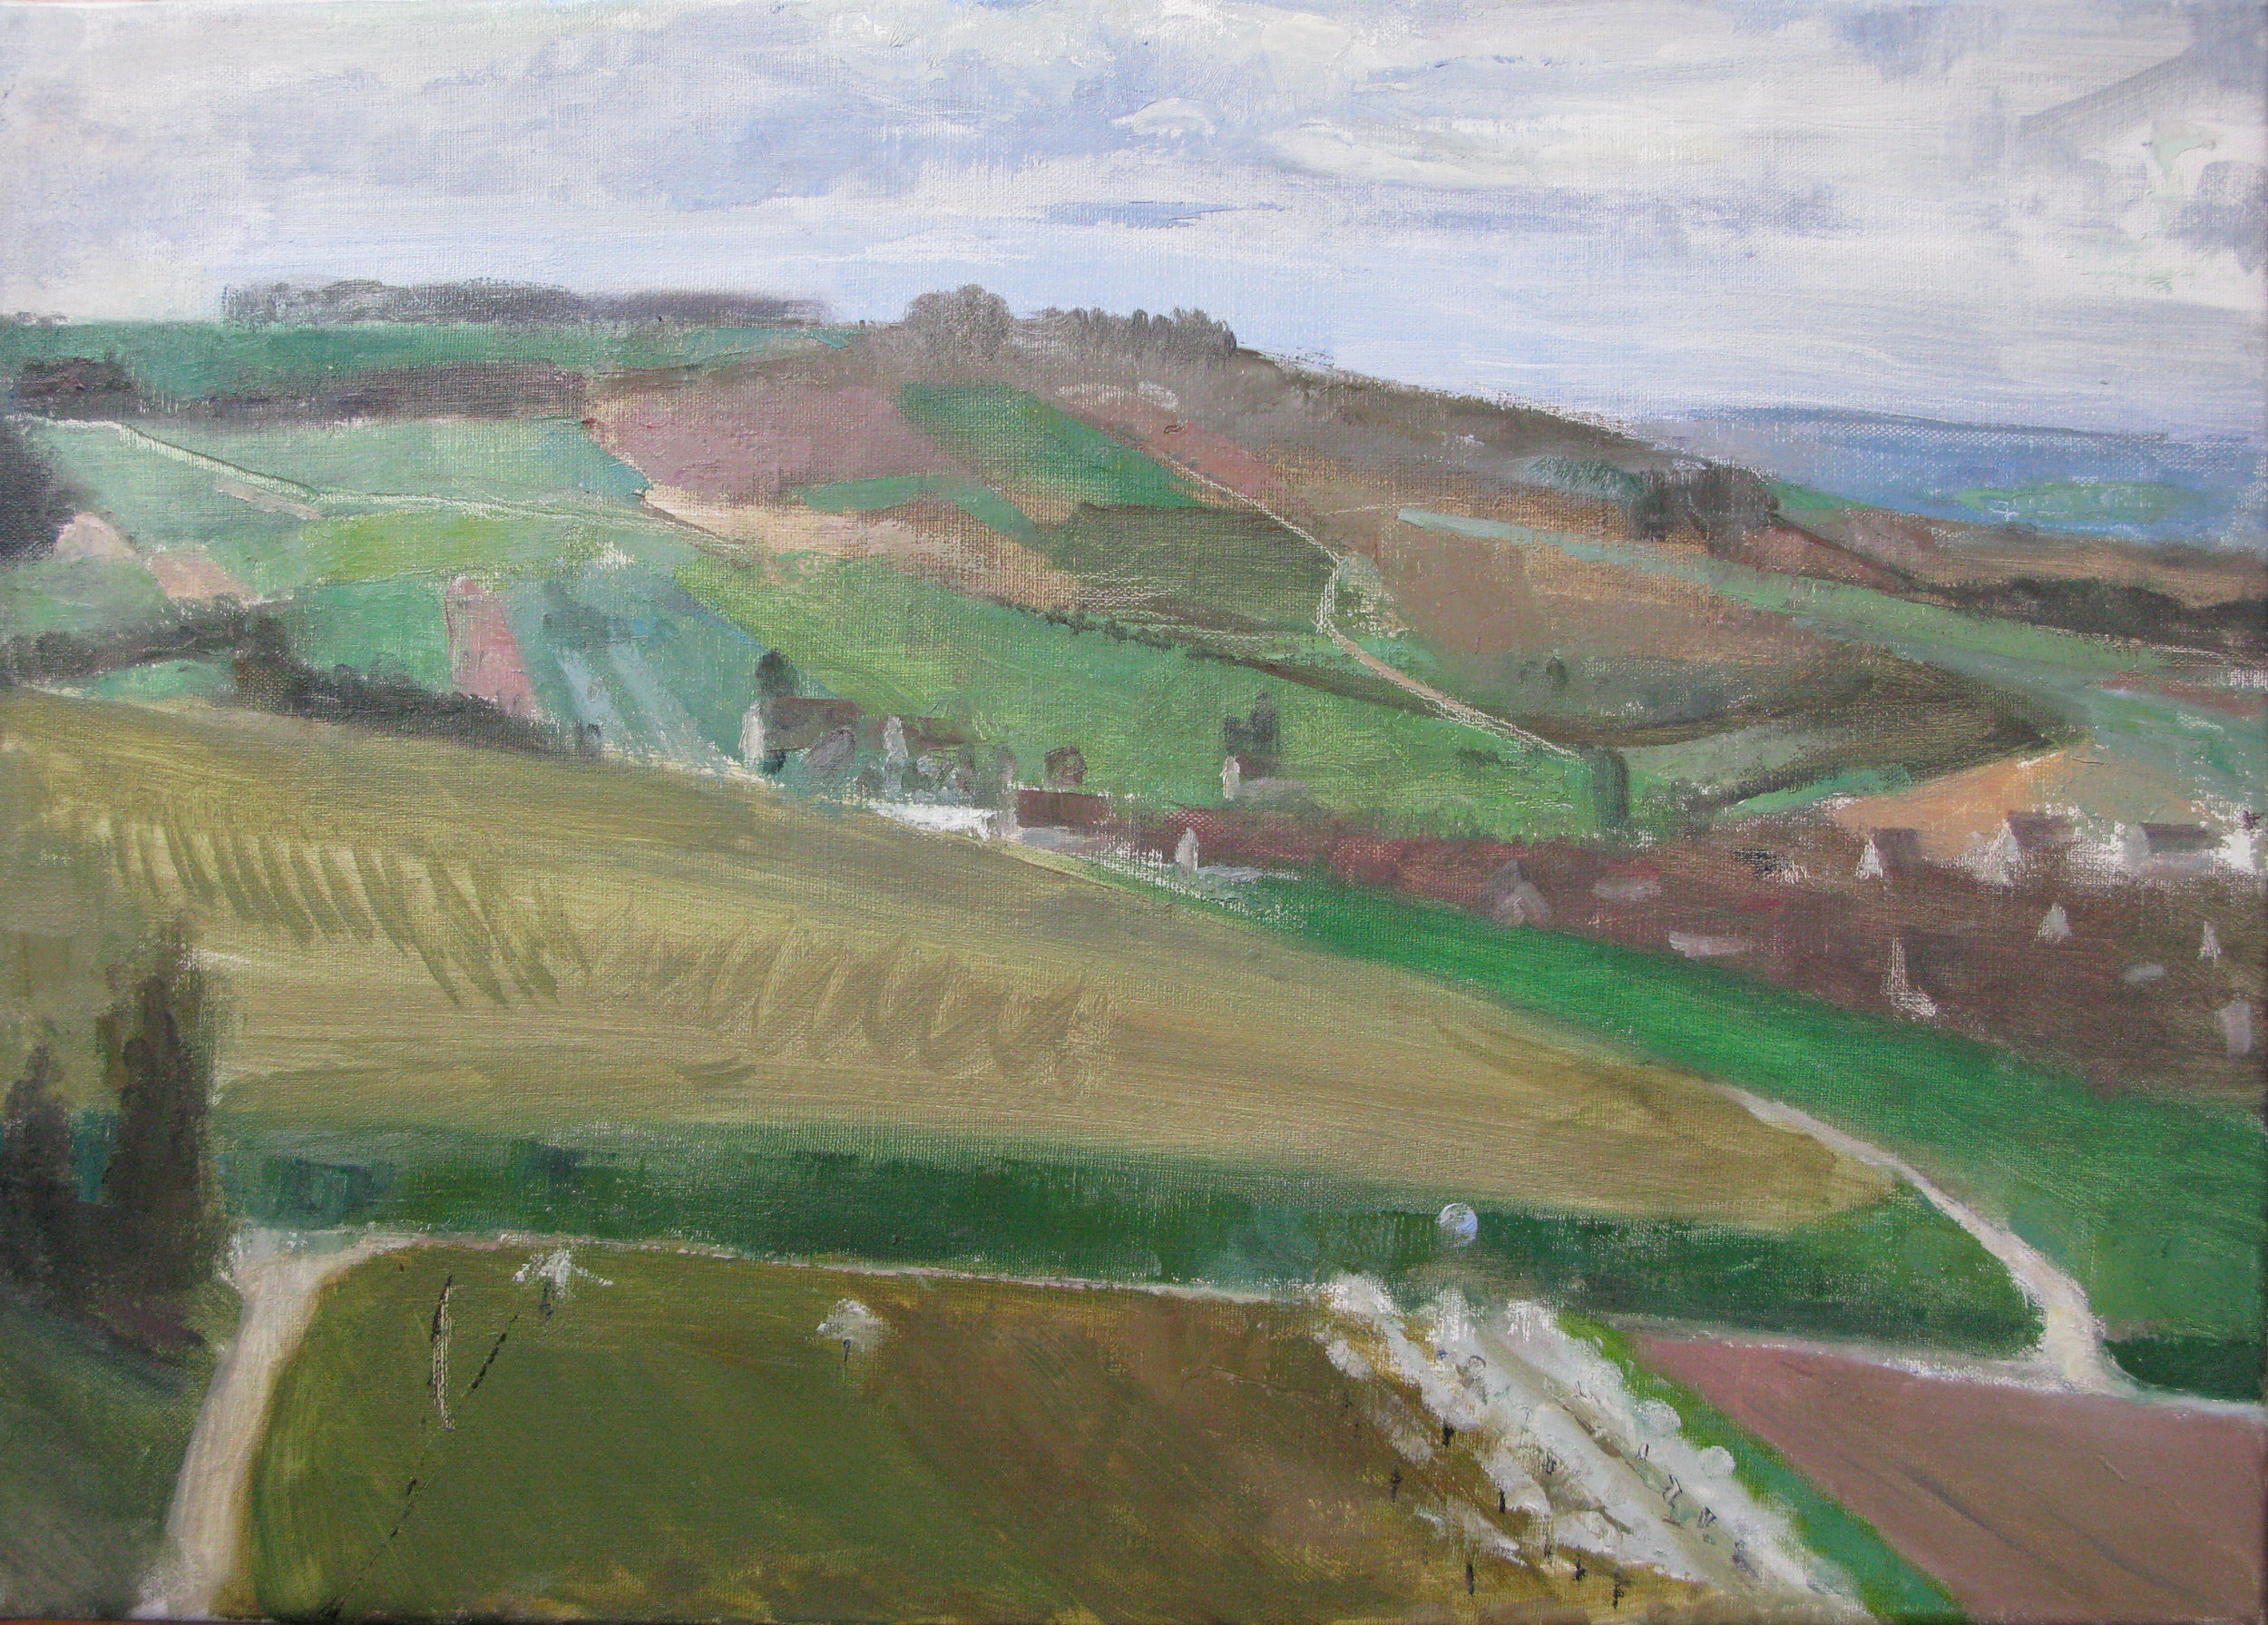 Irancy and Surrounding Hills, 17" x 24", oil on linen, 2013.